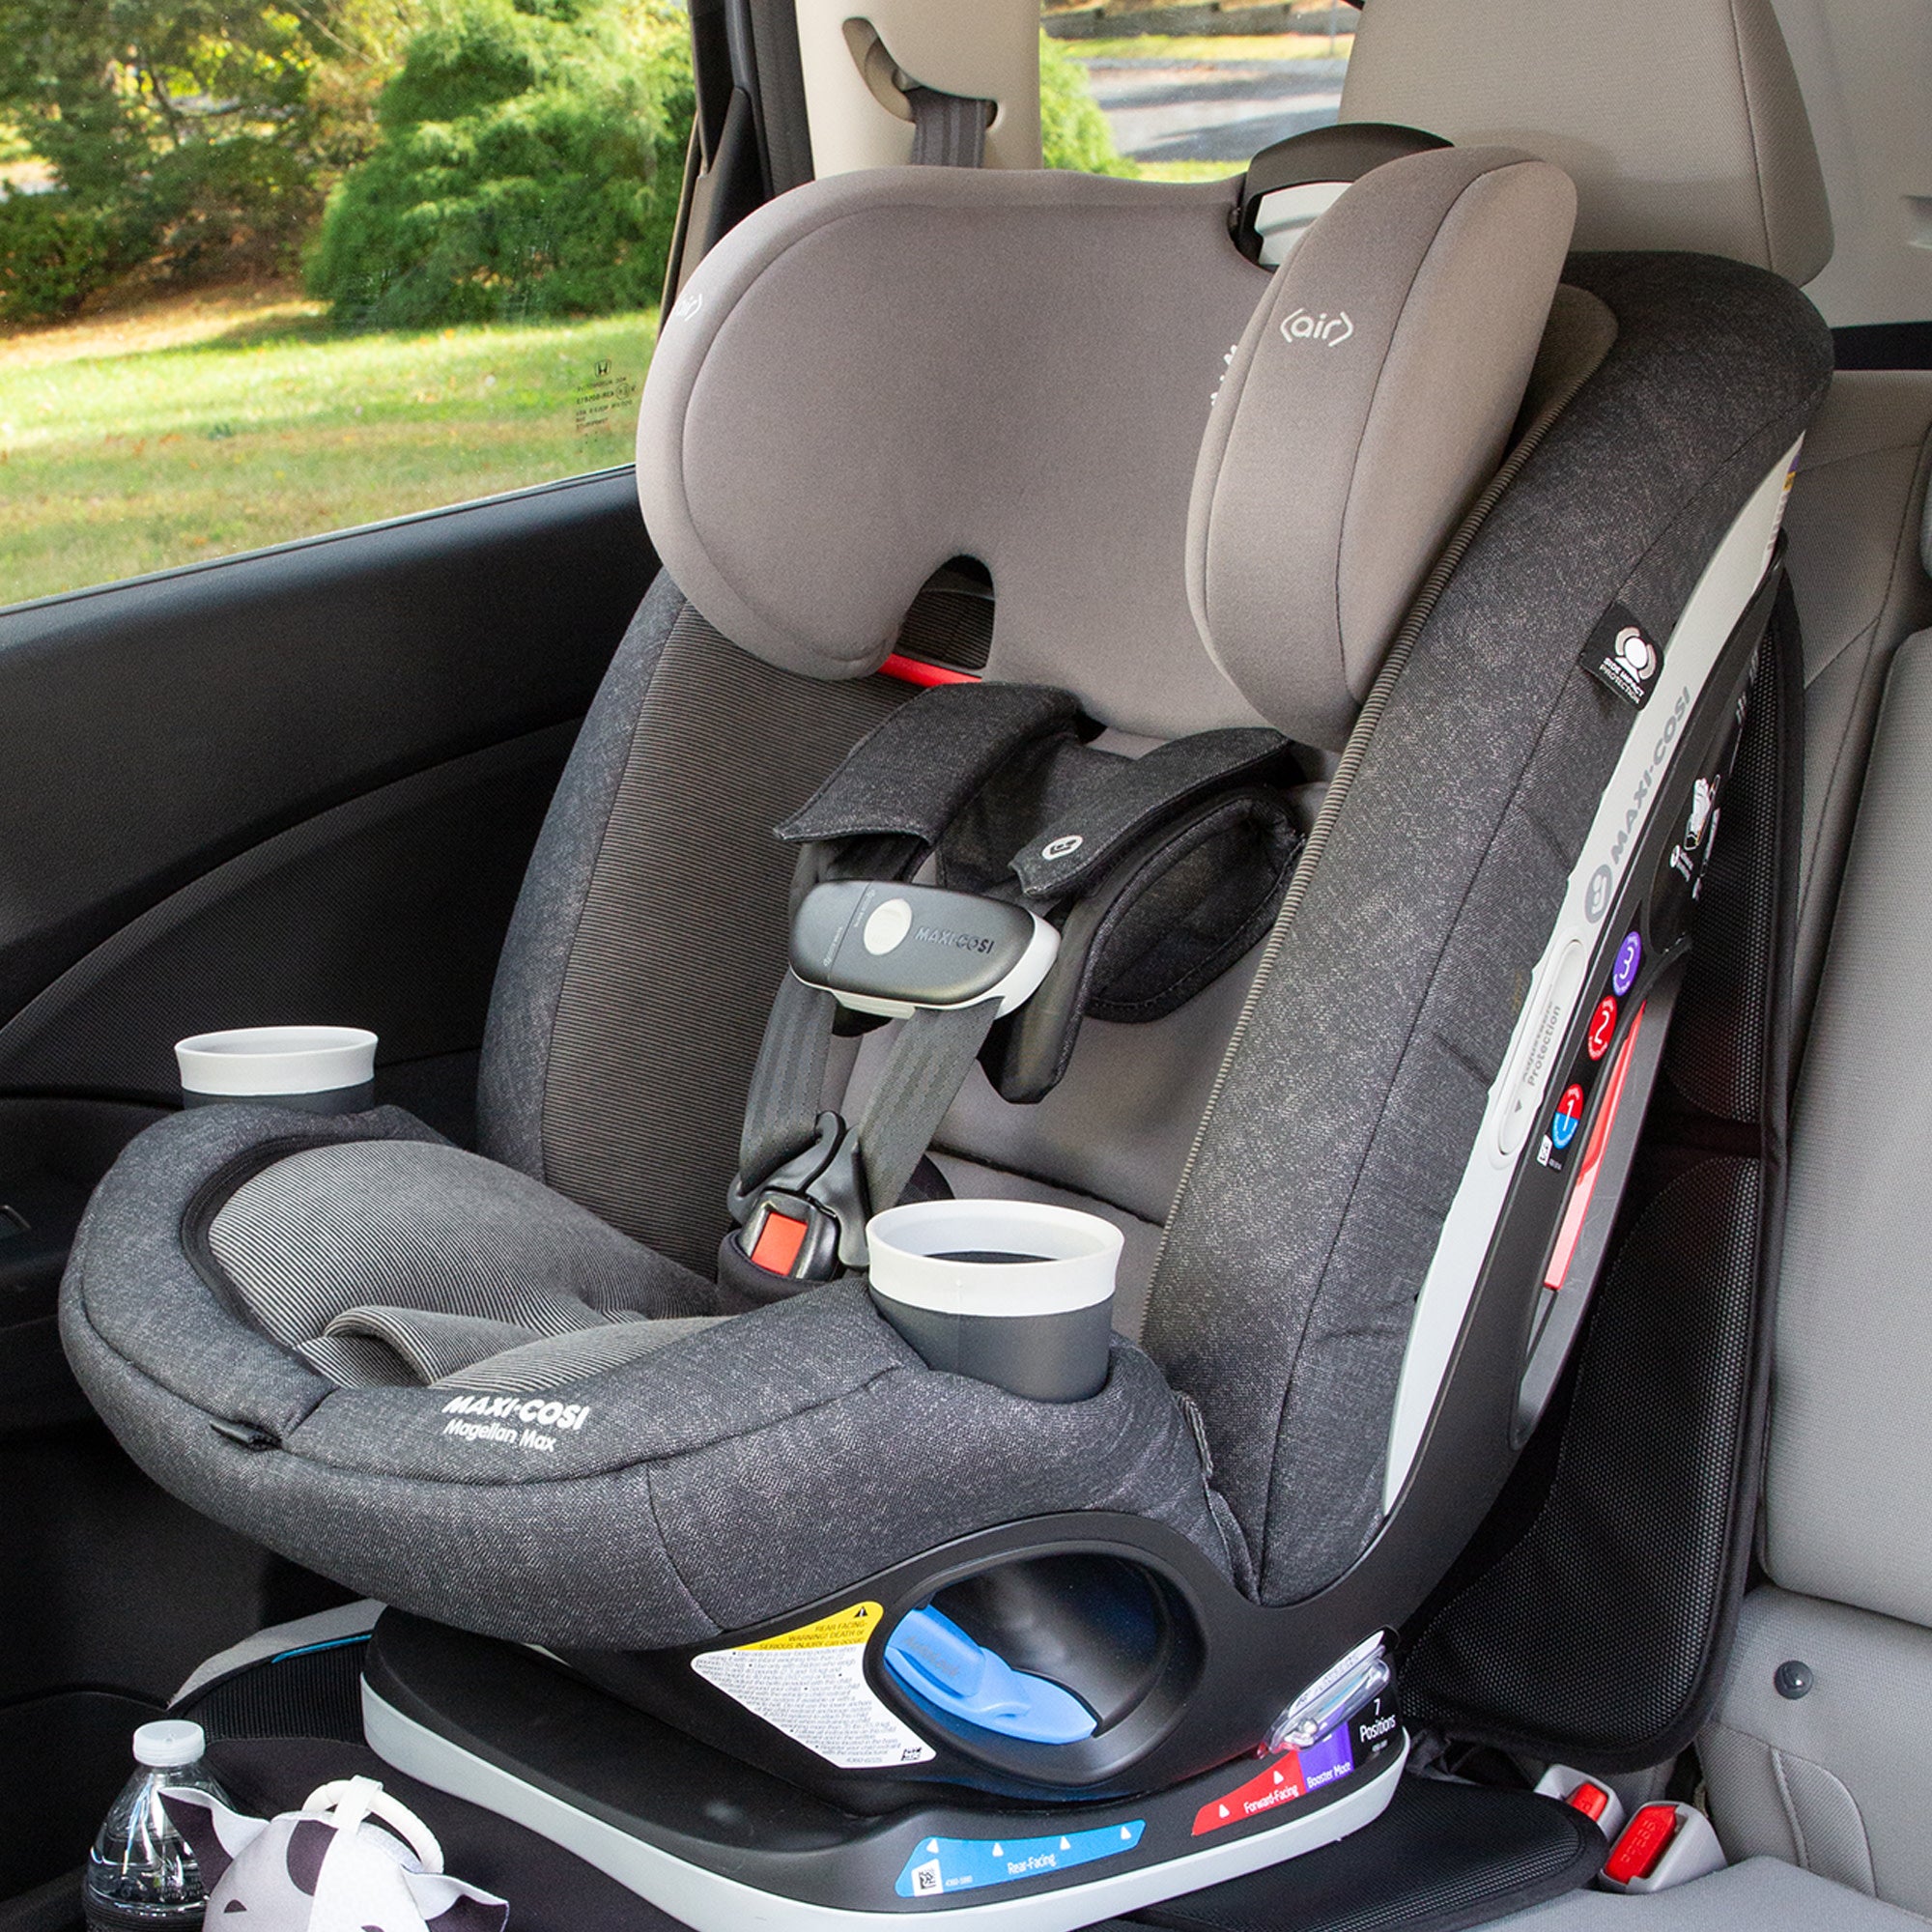 Seat protector with storage goes under car seat